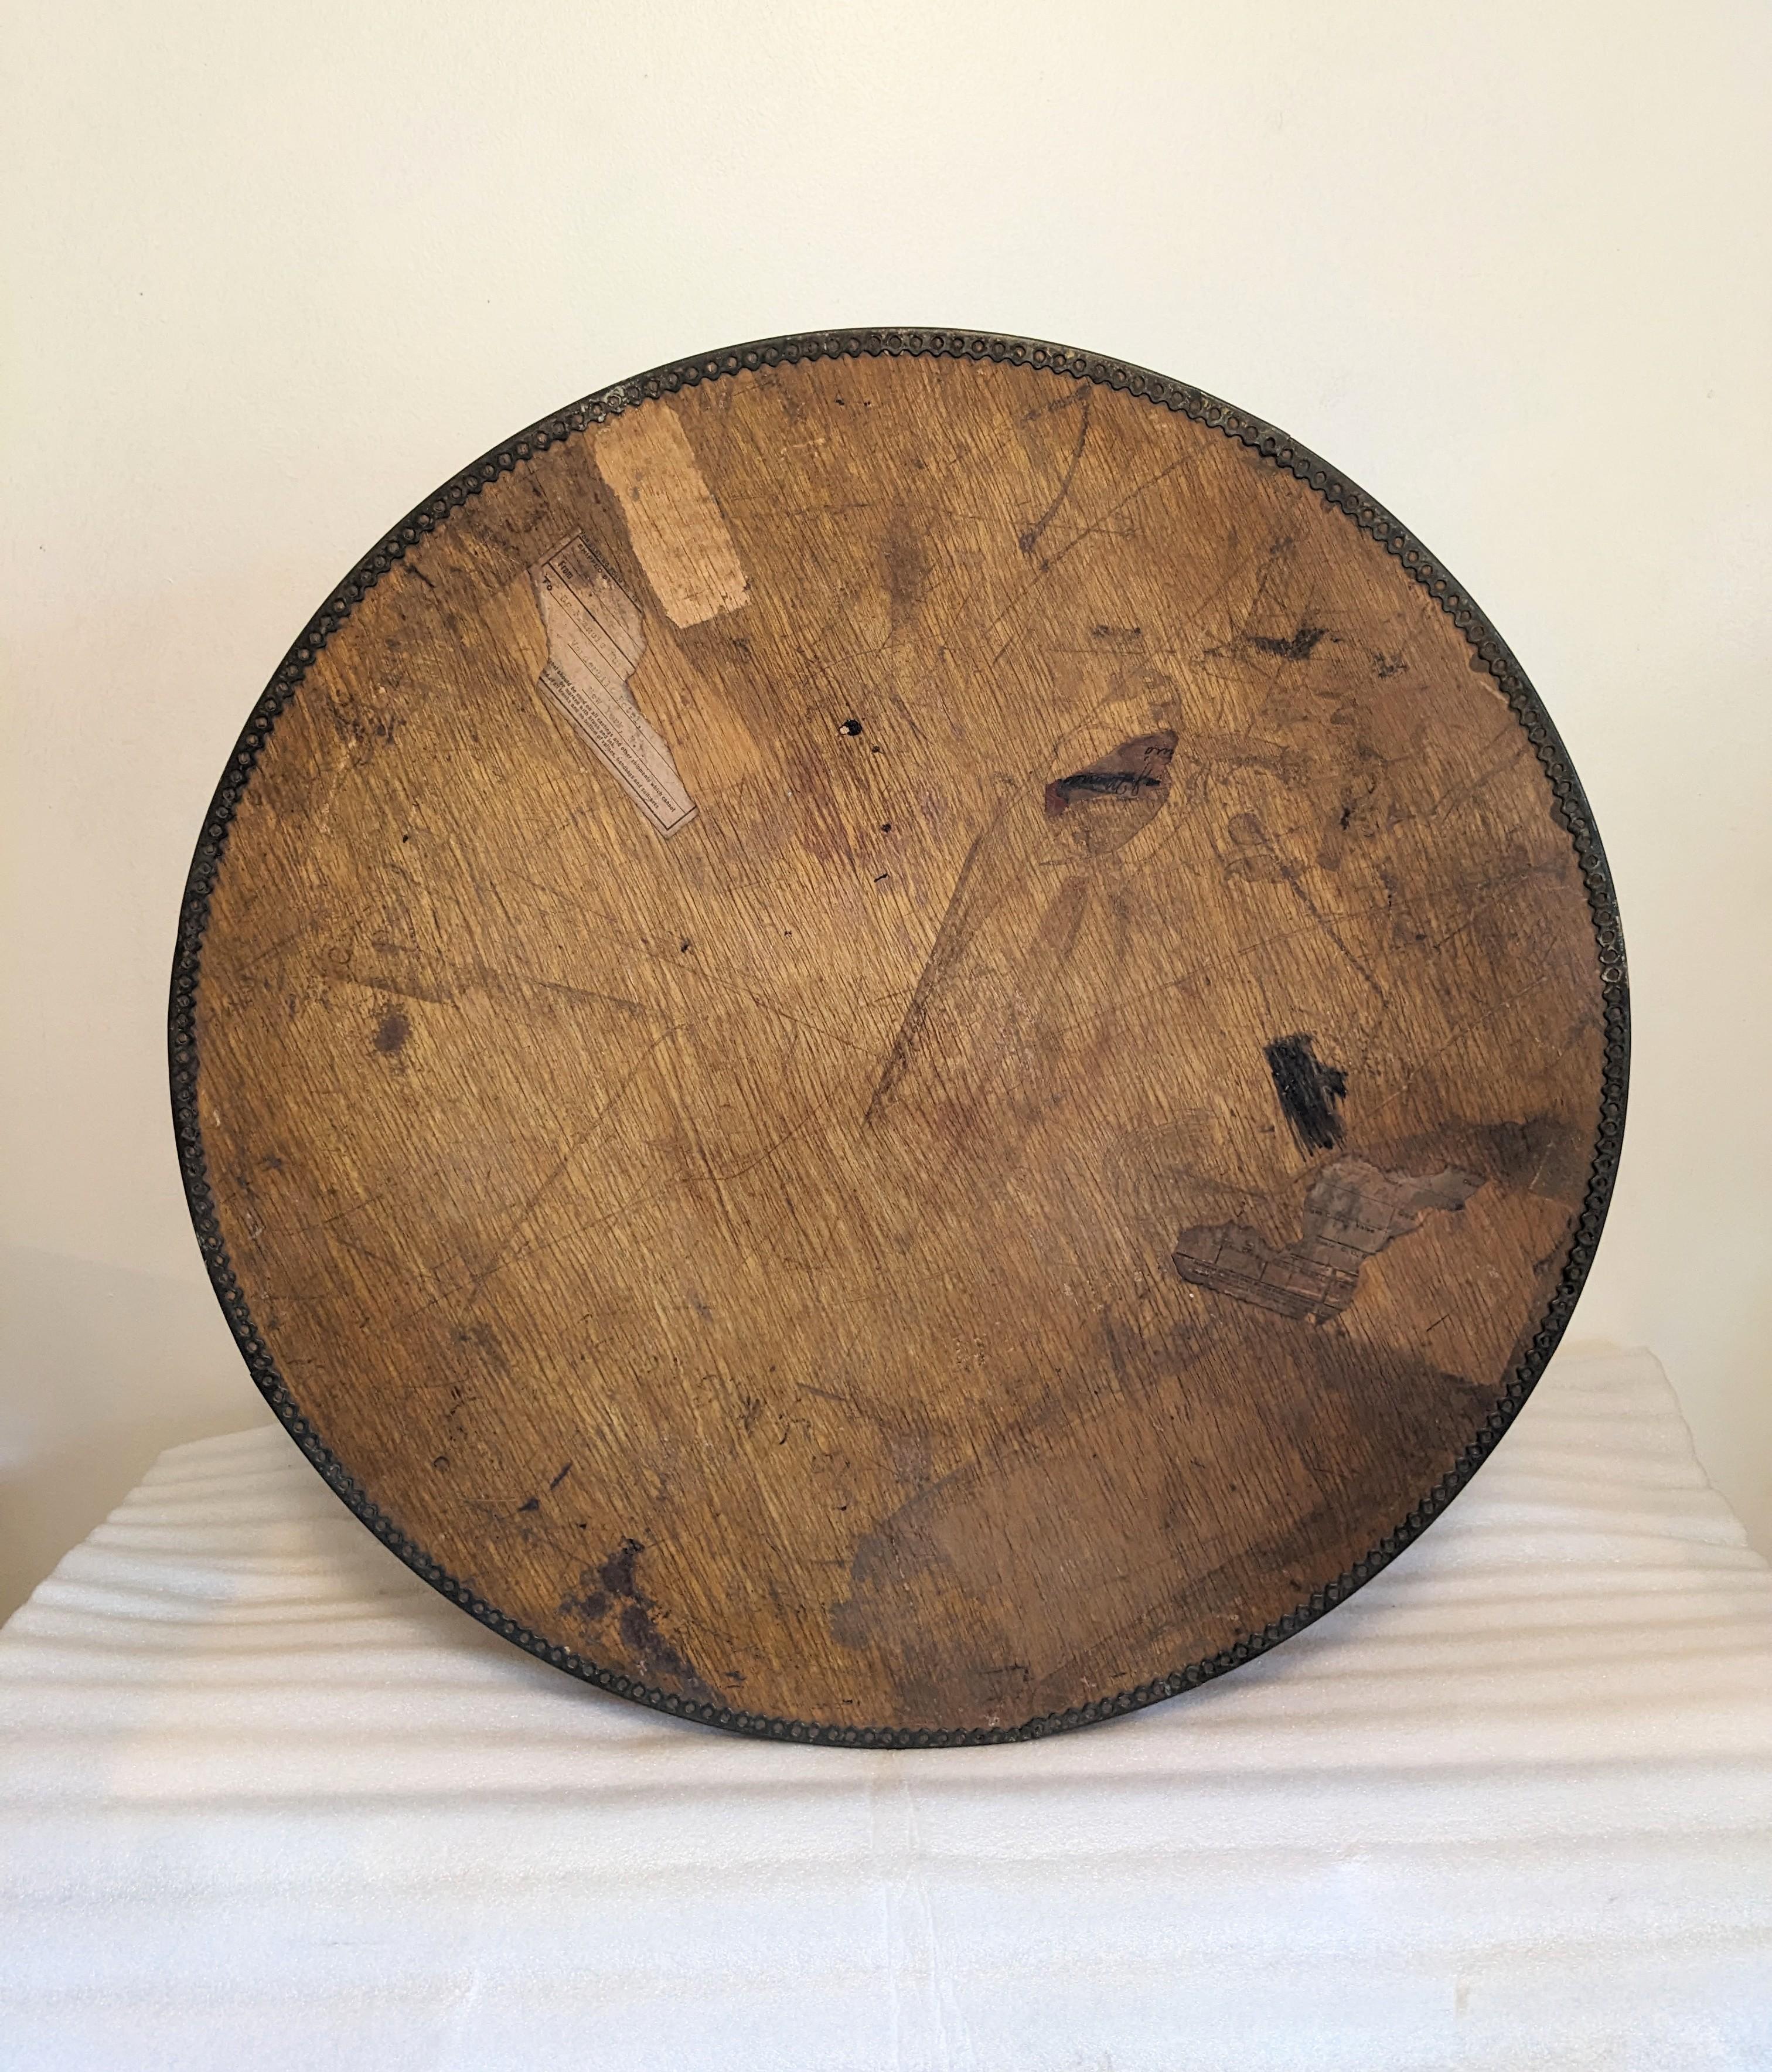 Large Edwardian Bent Wood Hat Box with metal riveted banding for support on all edges. Has a lot of period labels including Cunard Ships, with 4 feet as well to sit upright. Great for storage, European Early 1900's. 23.5